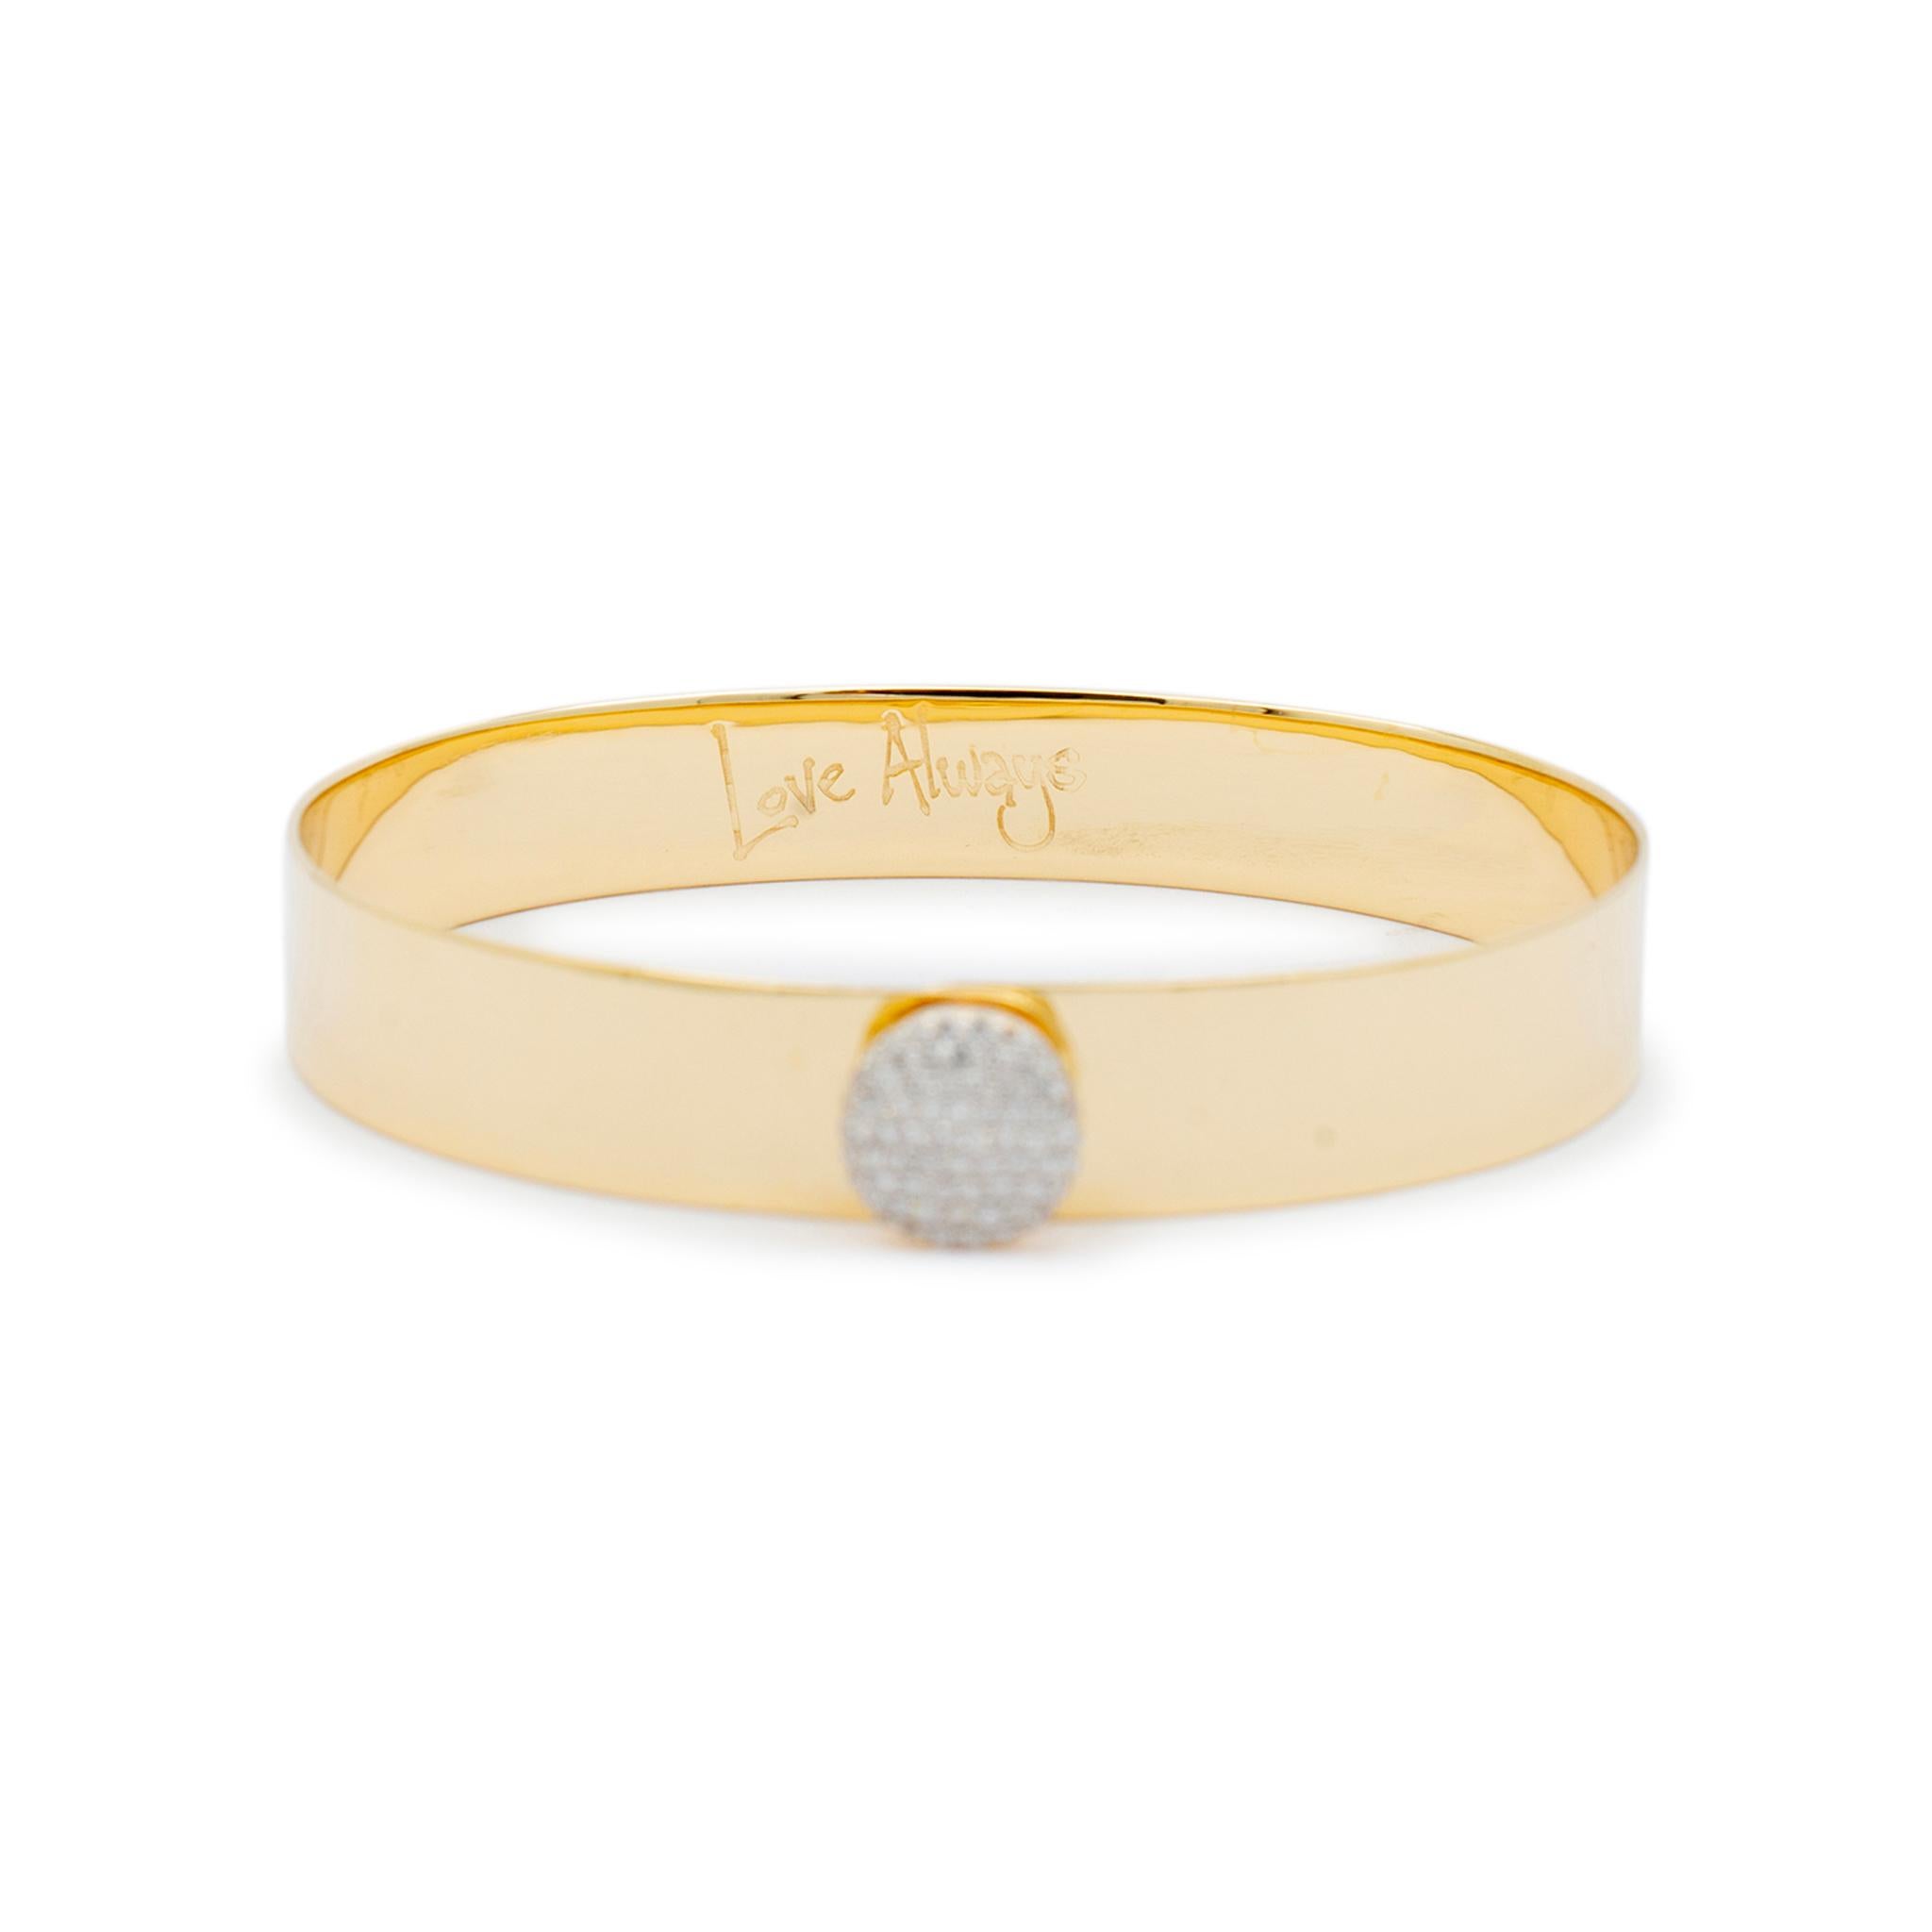 Brand: Phillips House

Gender: Ladies

Metal Type: 14K Yellow Gold

Length: 6.50 Inches

Width: 10.00 mm

Weight: 18.50 grams

Ladies 14K yellow gold diamond modern-style (1950 to present) bangle bracelet. Engraved with 